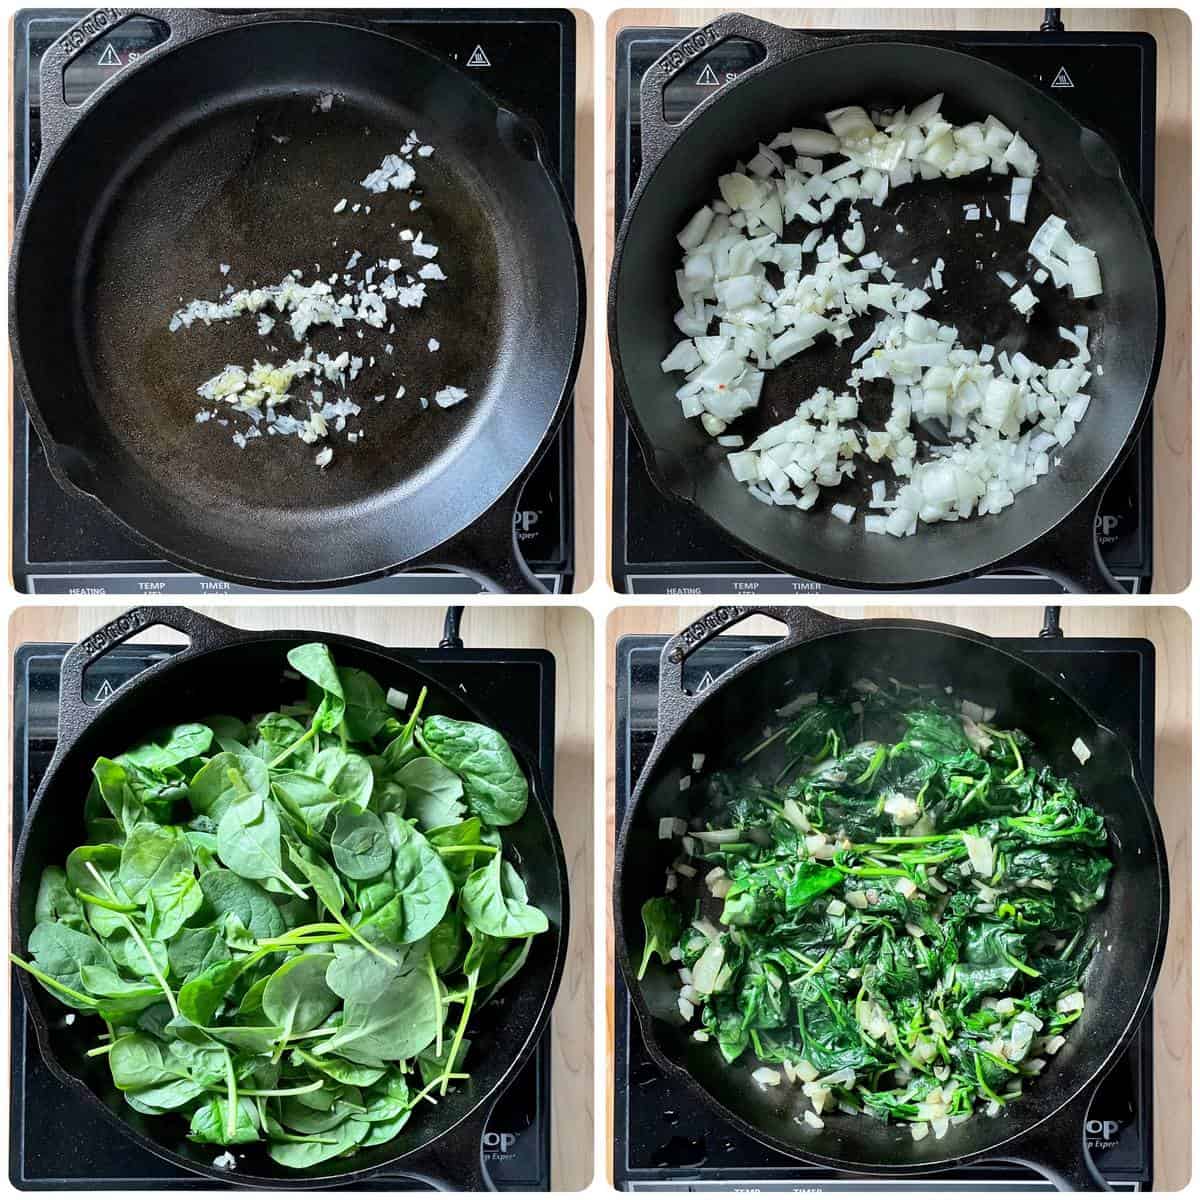 Four process shots show the garlic, onions and spinach being sauteed.